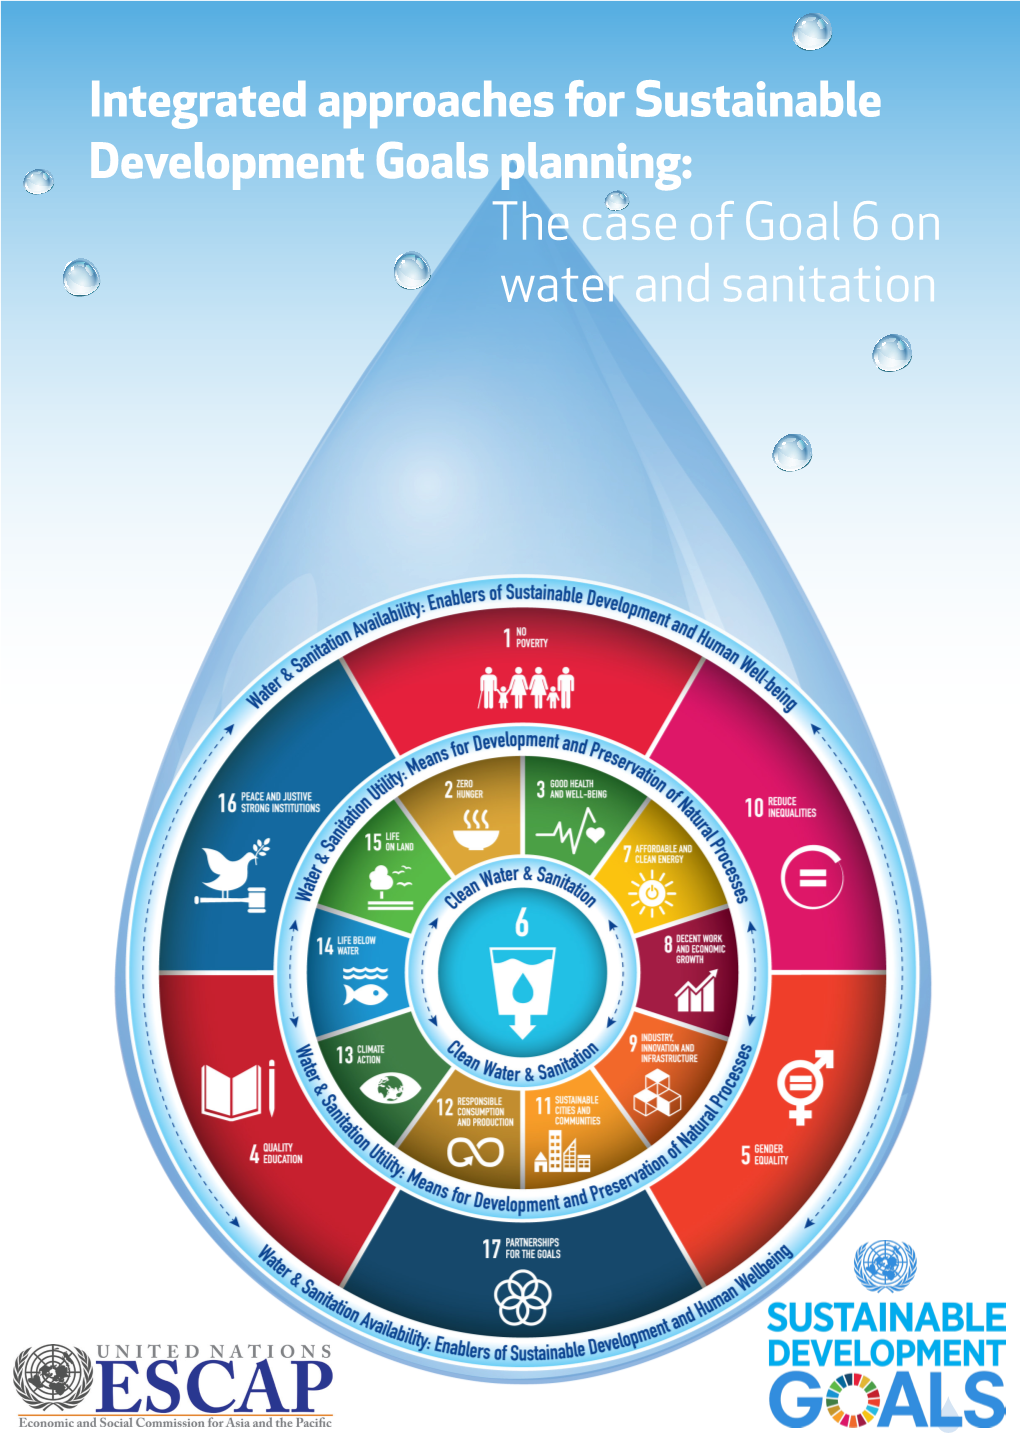 The Case of Goal 6 on Water and Sanitation